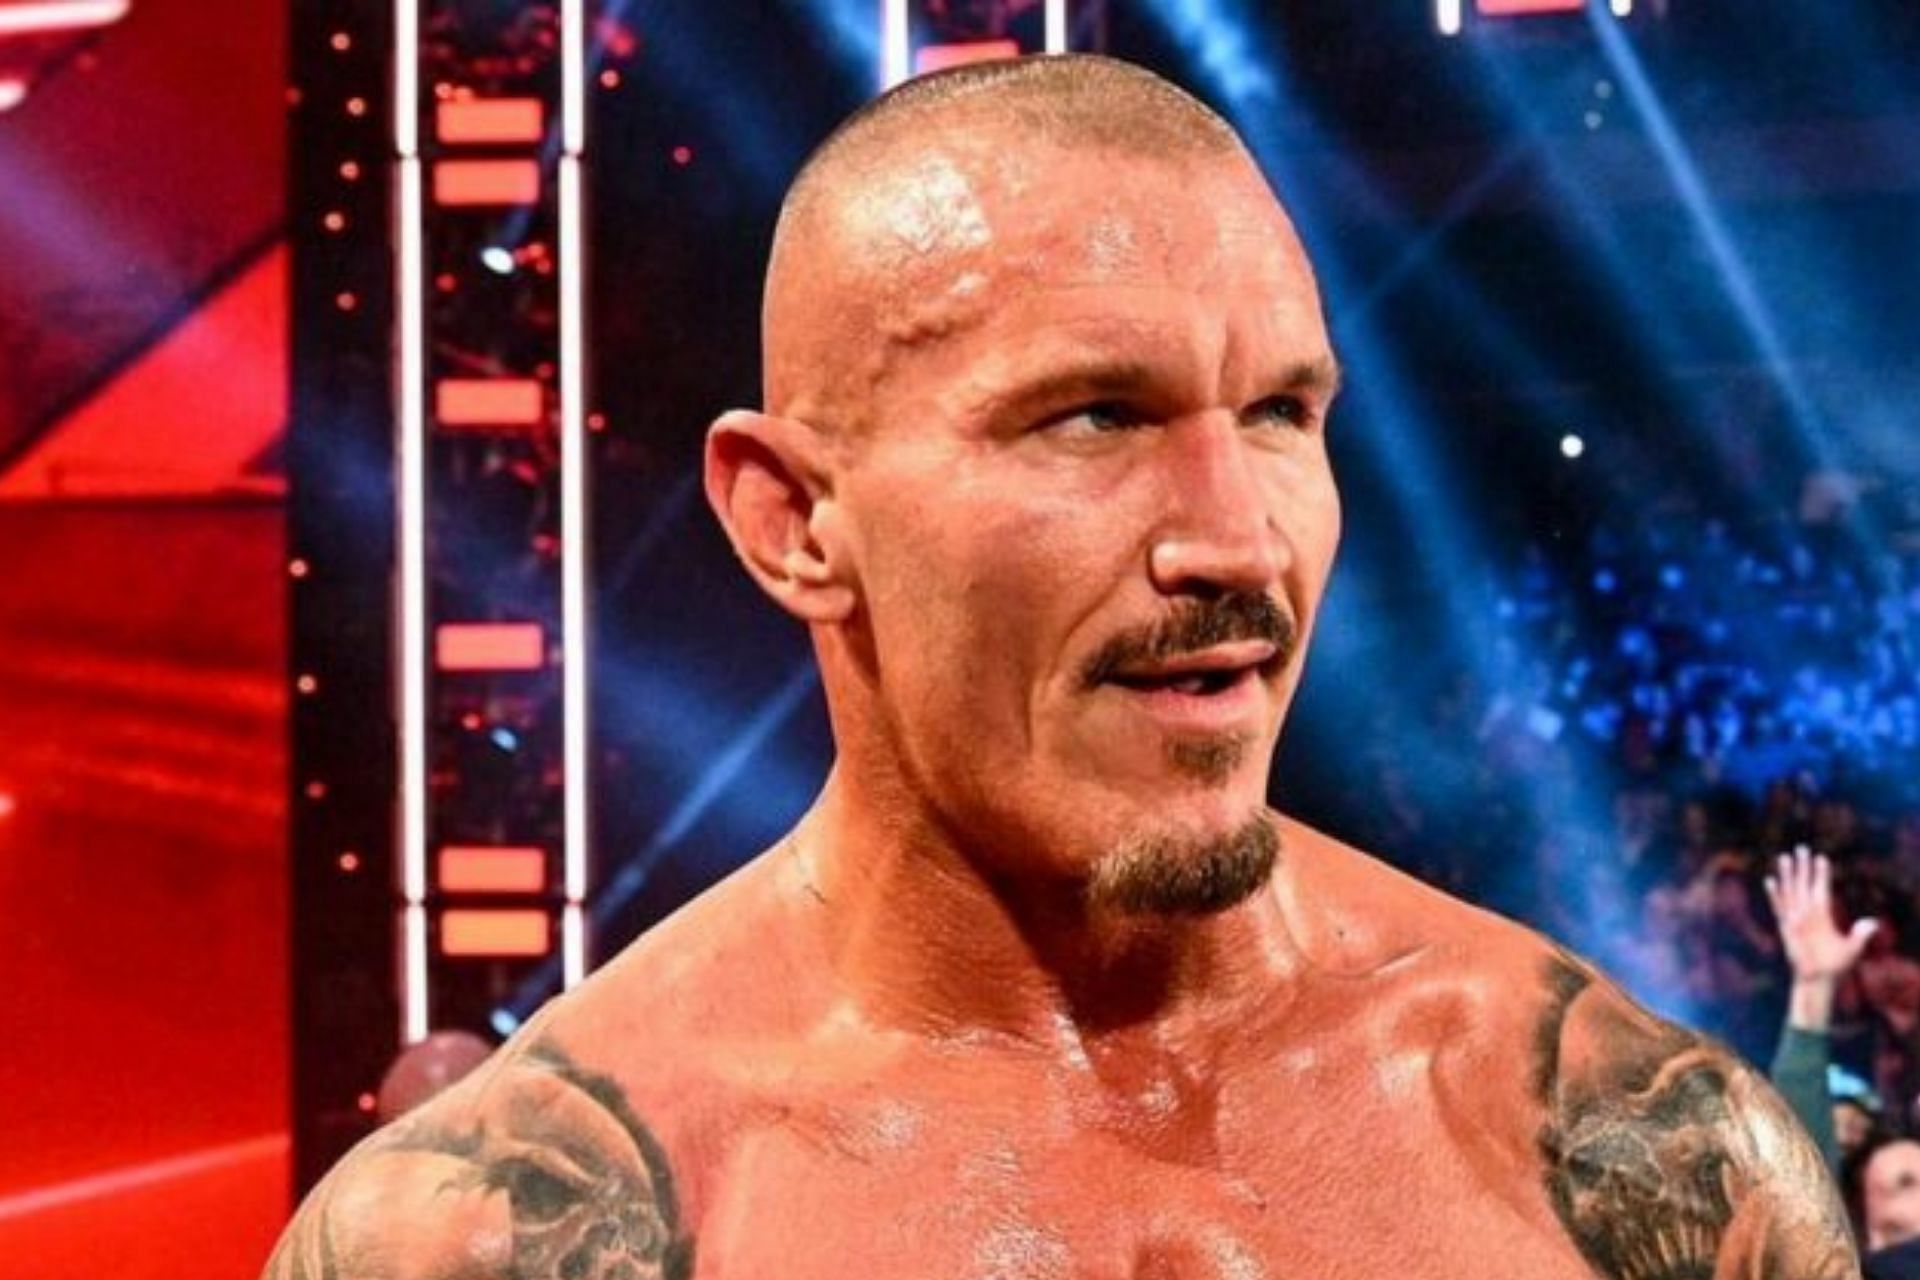 A former WWE Champion reminisces about his match with Randy Orton